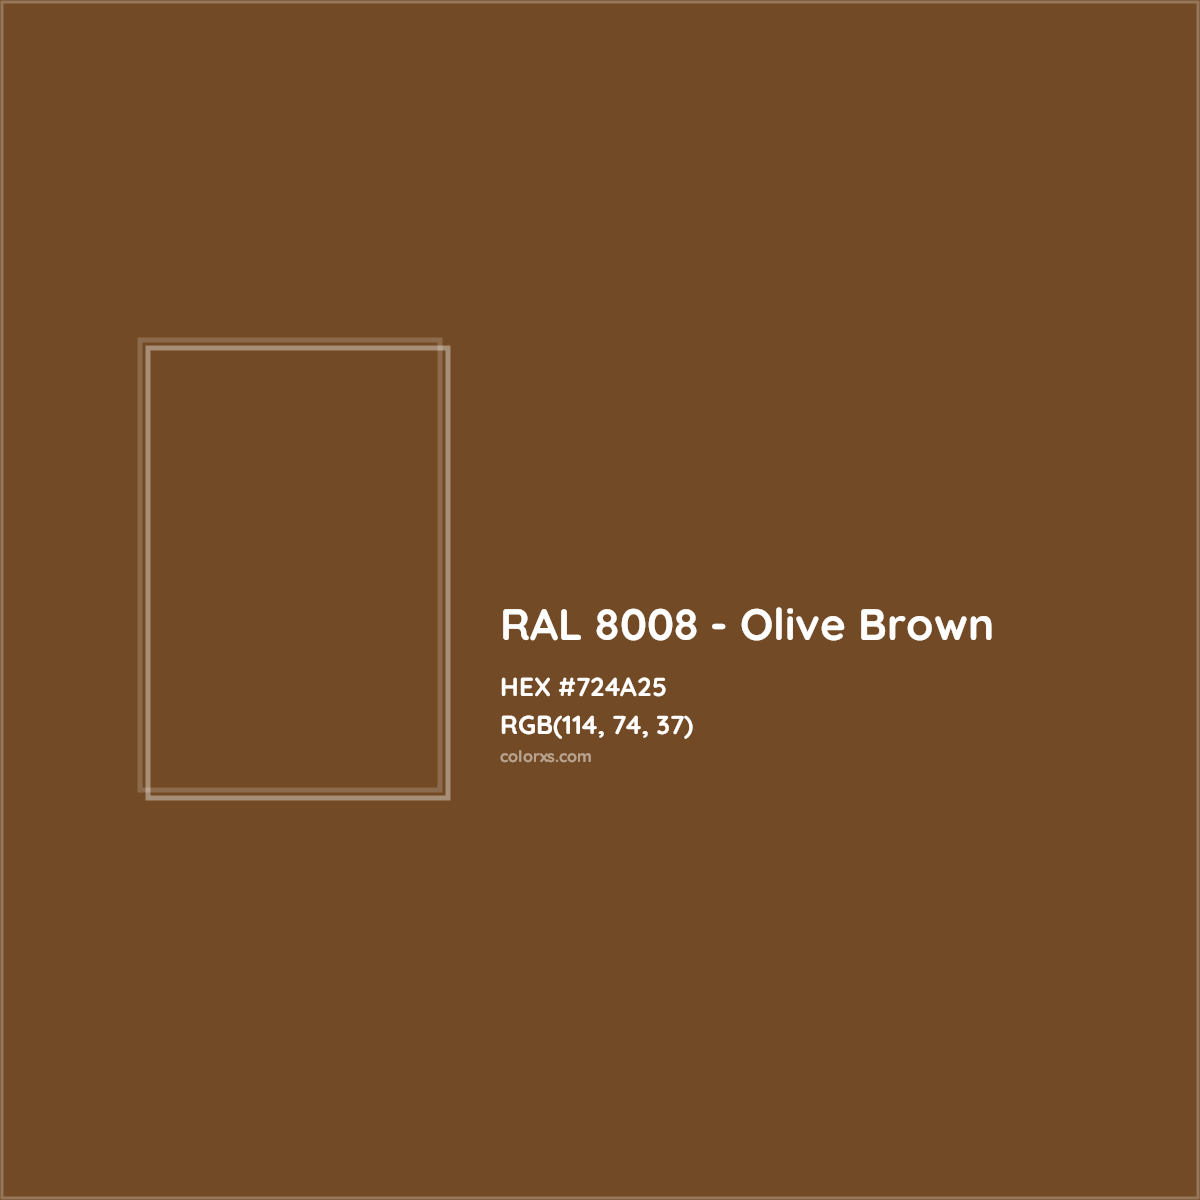 HEX #724A25 RAL 8008 - Olive Brown CMS RAL Classic - Color Code